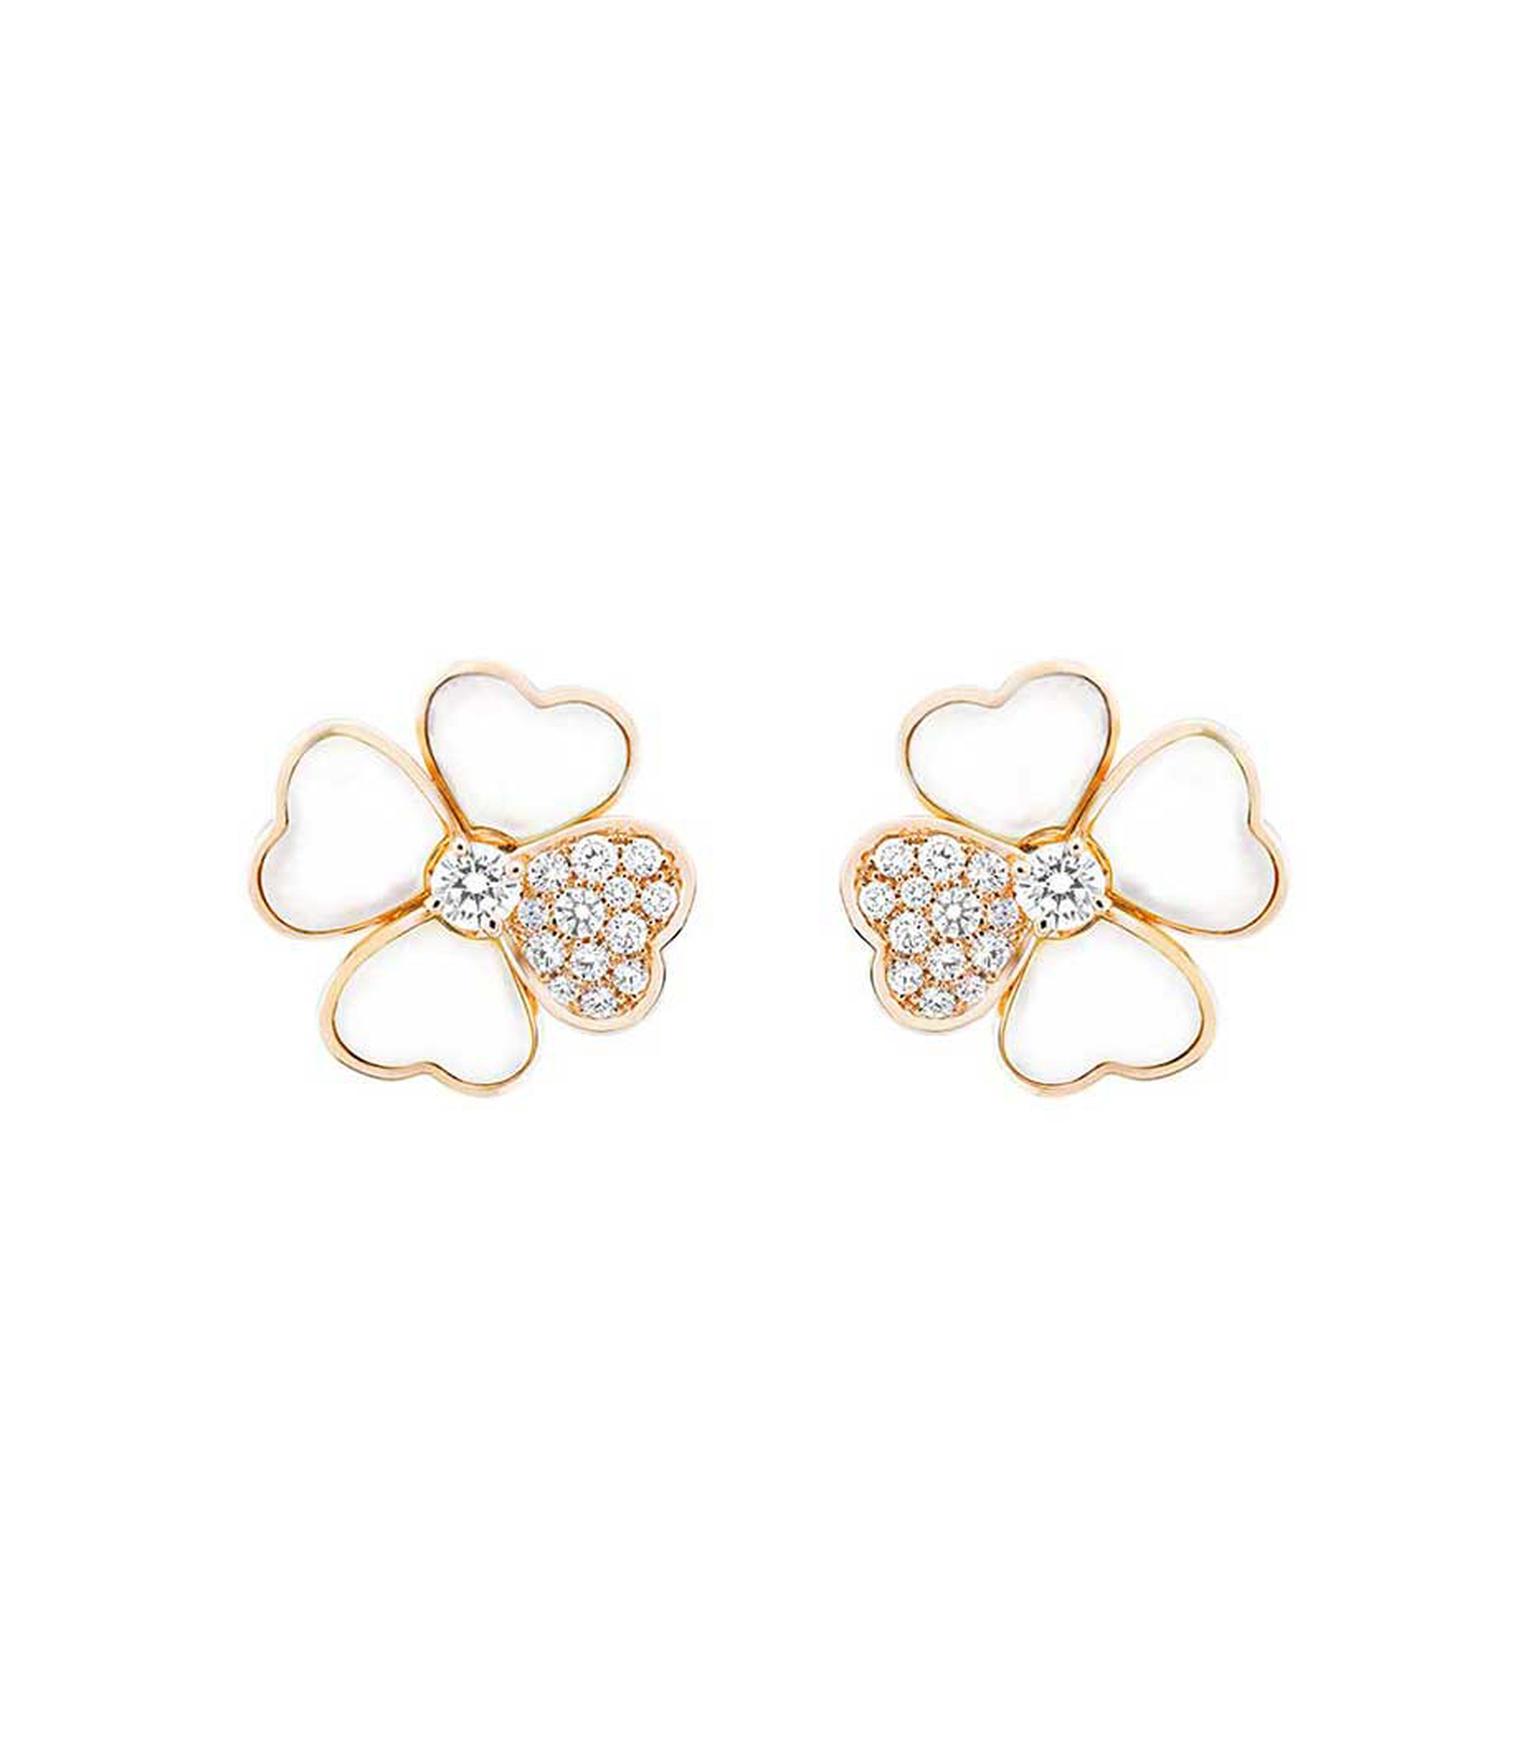 Van Cleef & Arpels Cosmos earrings in rose gold with brilliant-cut diamond buds surrounded by white mother-of-pearl and diamond petals